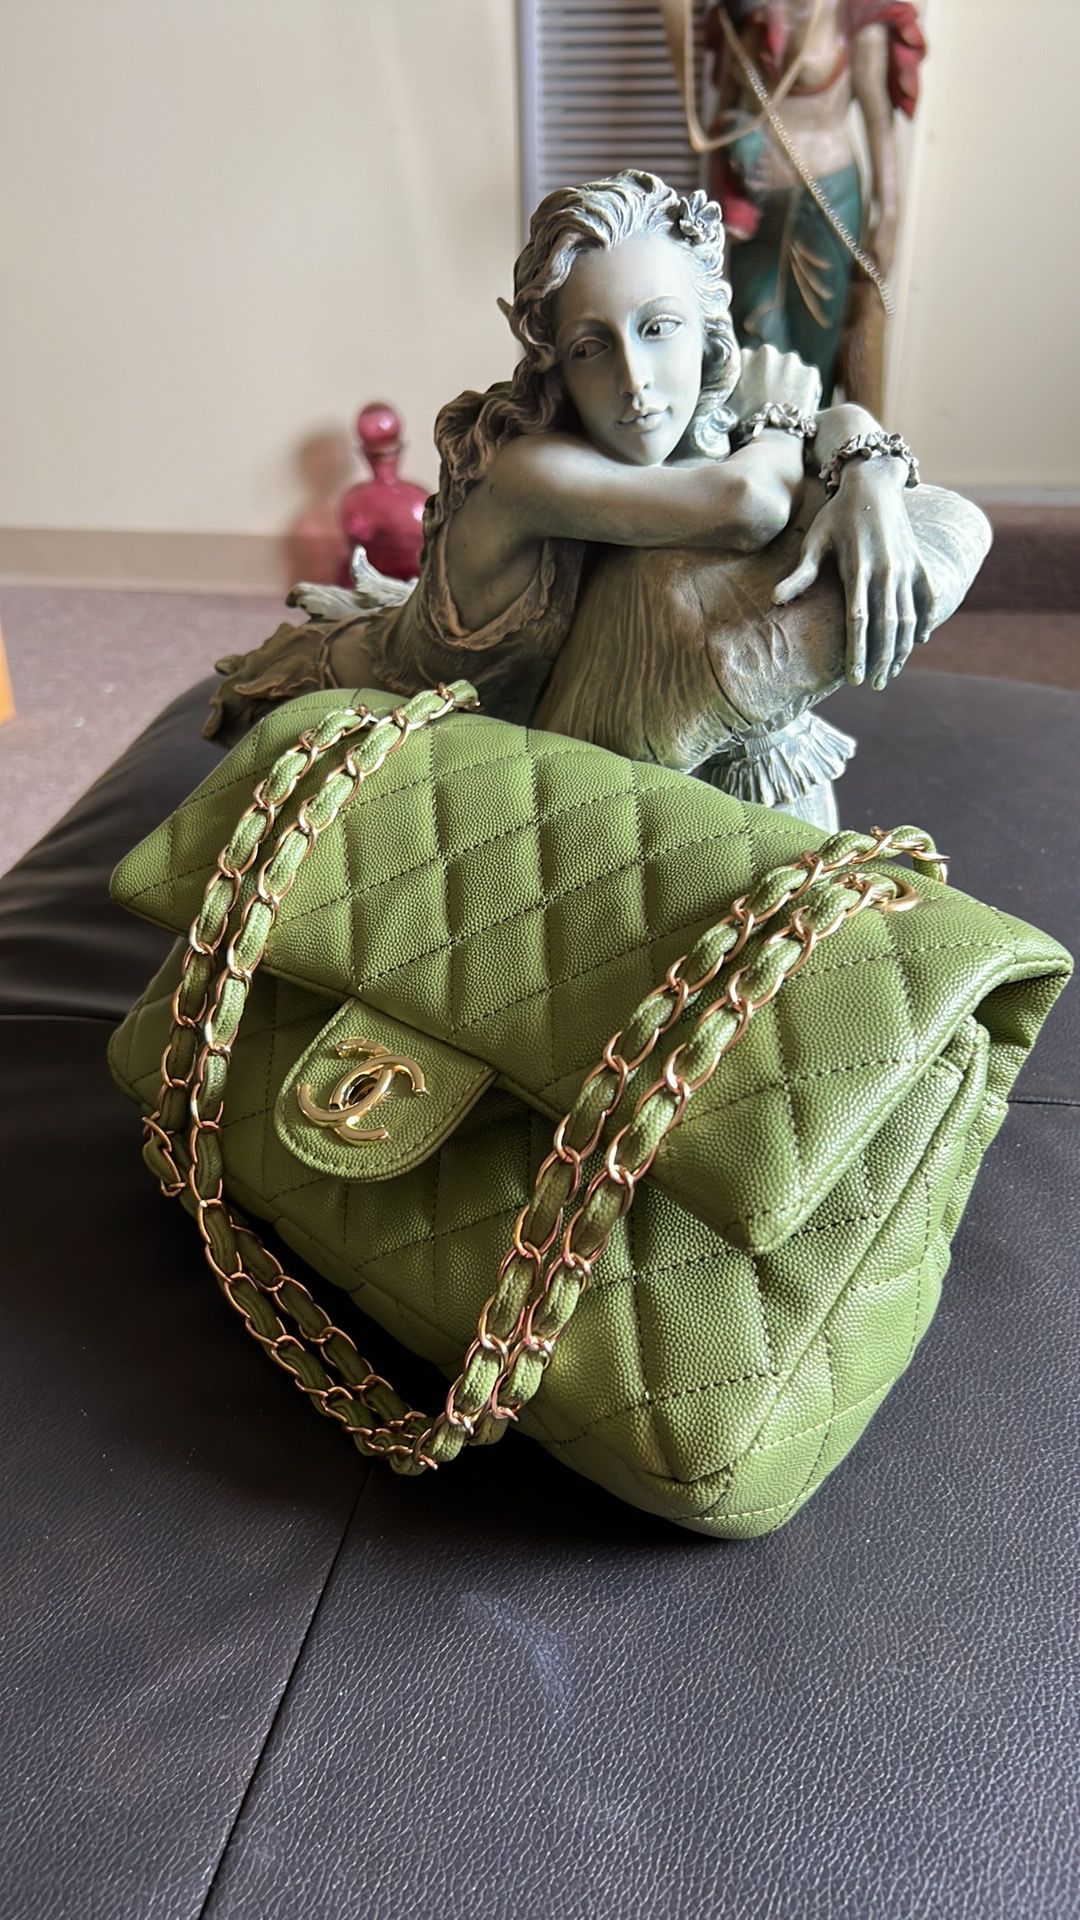 Chanel Bag For Women Very Nice New